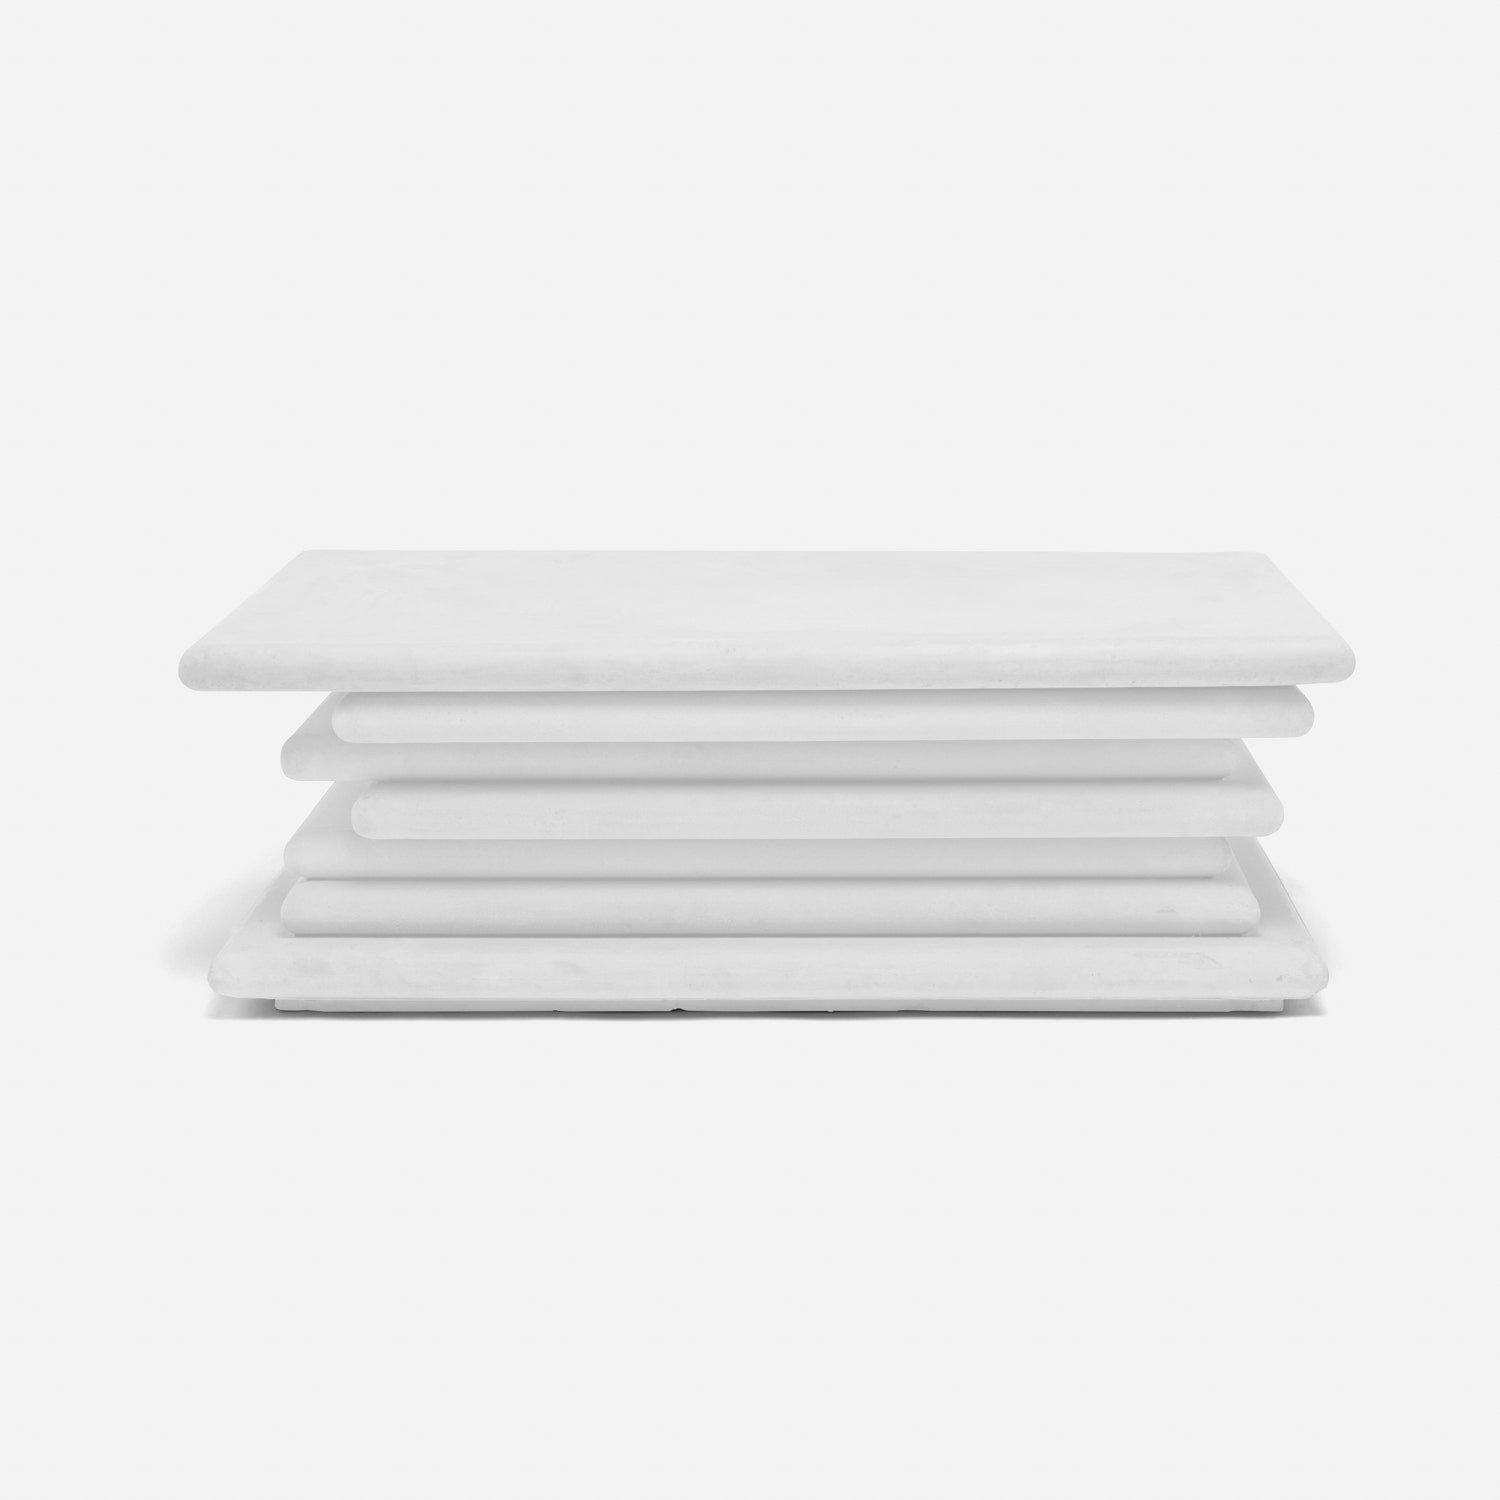 made goods dorsey coffee table white plaster 64 inch